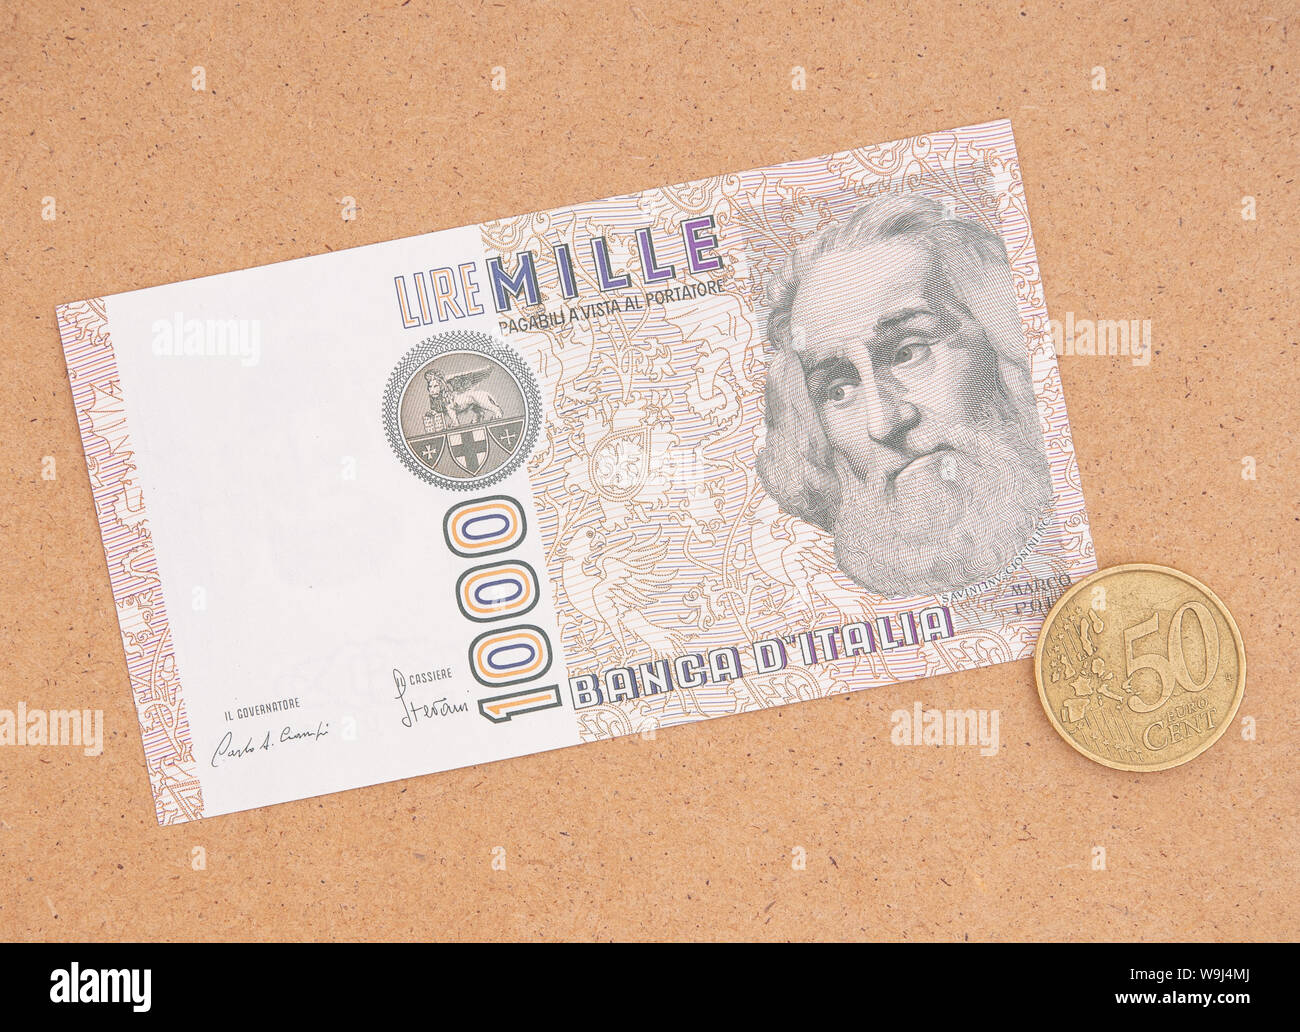 Italian vintage and new currency. Lira note and 50 Euro cents coin. The original exchange rate when the euro was first adopted was approximatey 1000 Stock Photo